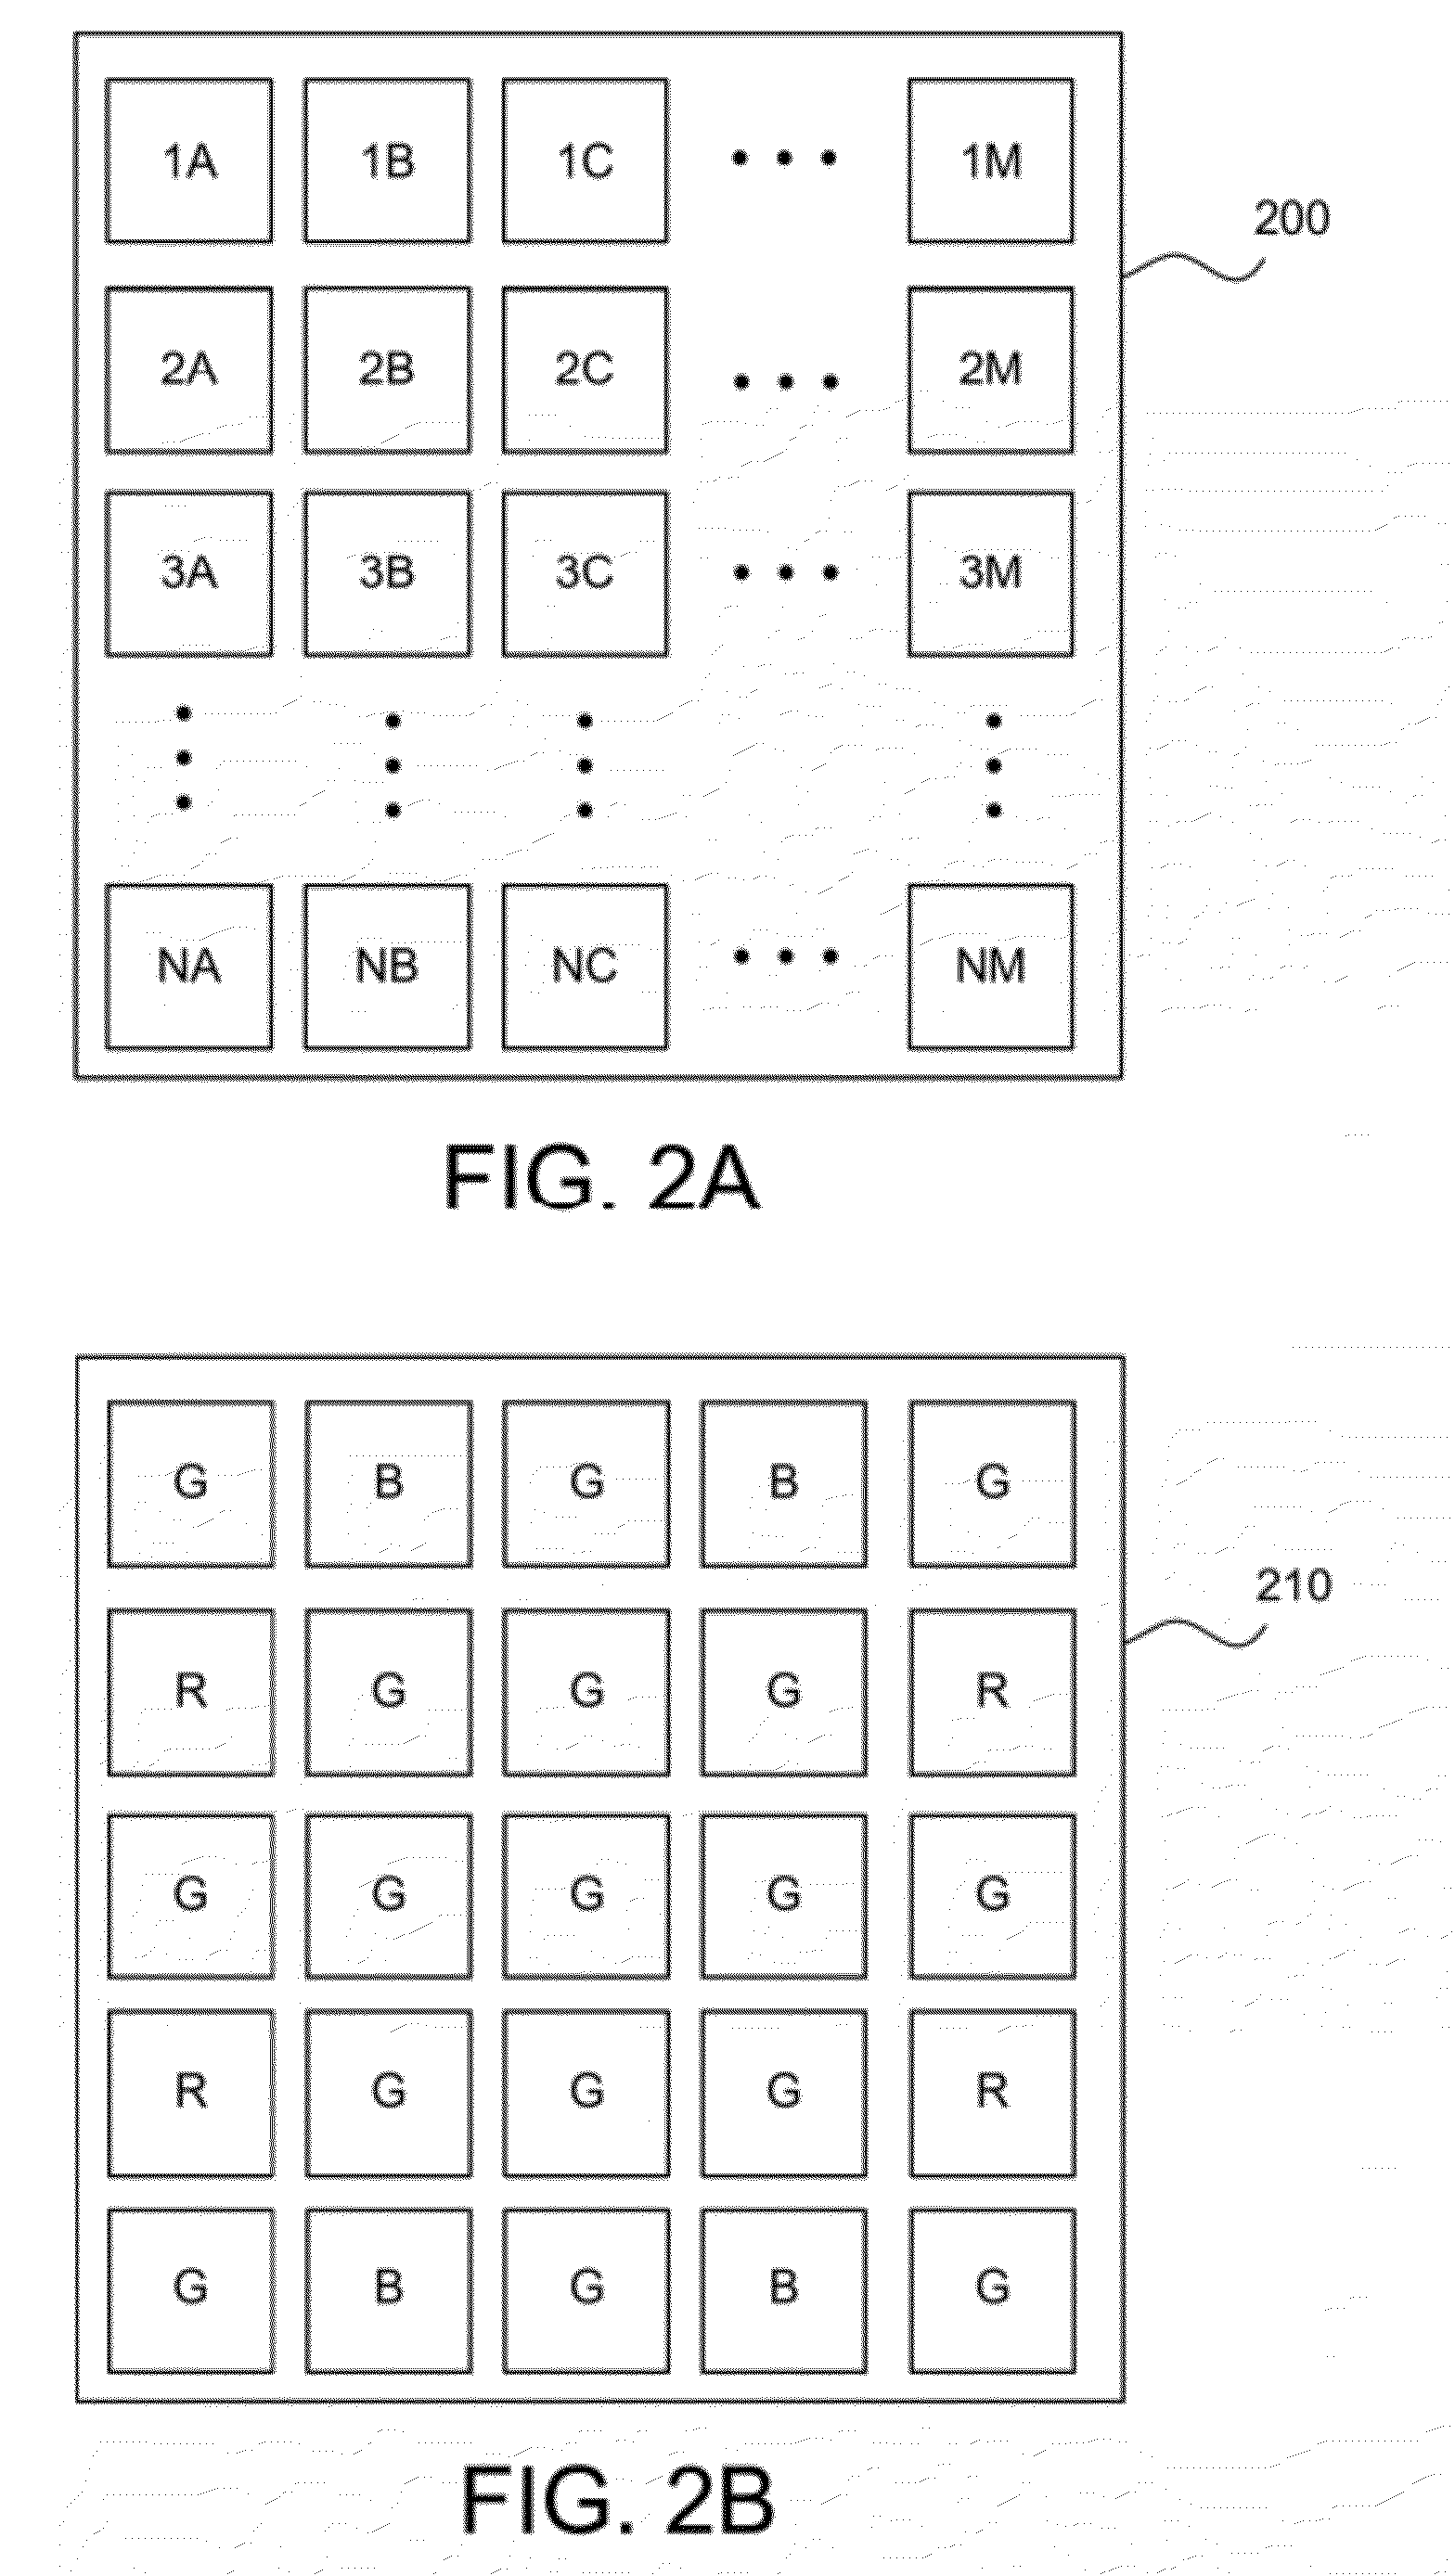 Systems and methods for synthesizing high resolution images using super-resolution processes